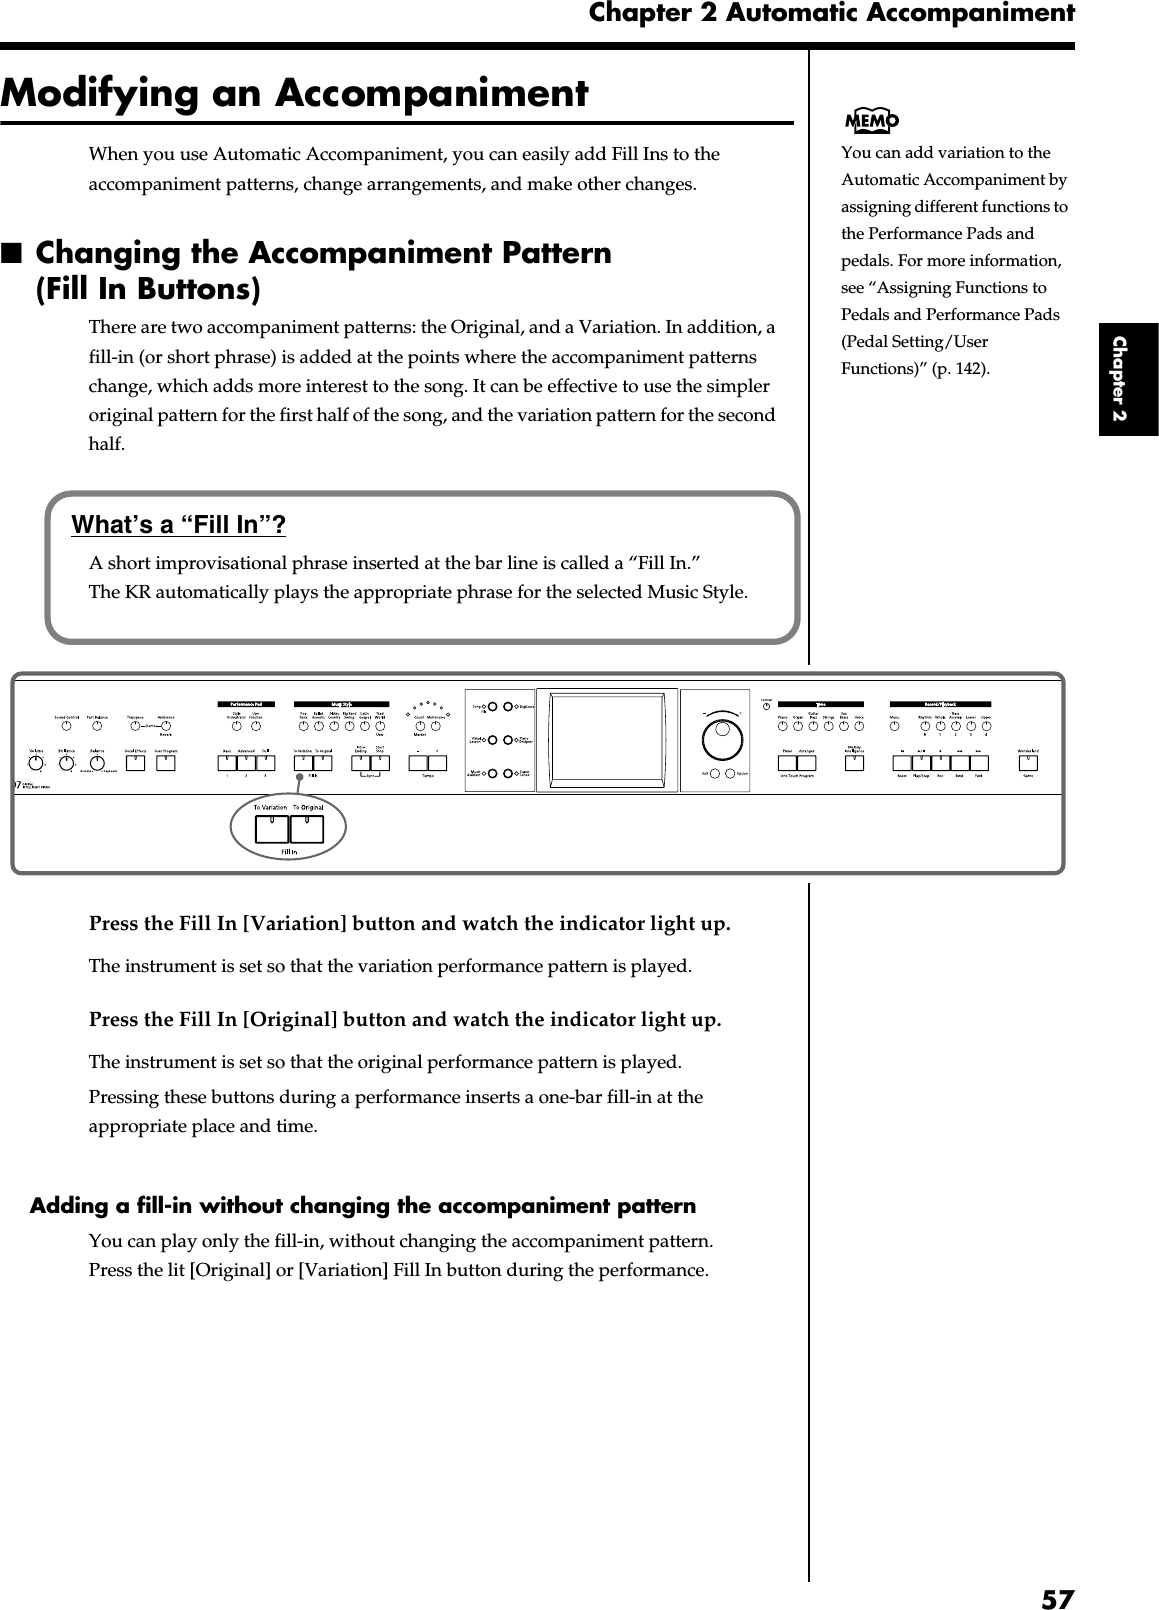 57Chapter 2 Automatic AccompanimentChapter 2Modifying an AccompanimentWhen you use Automatic Accompaniment, you can easily add Fill Ins to the accompaniment patterns, change arrangements, and make other changes.■Changing the Accompaniment Pattern (Fill In Buttons)There are two accompaniment patterns: the Original, and a Variation. In addition, a fill-in (or short phrase) is added at the points where the accompaniment patterns change, which adds more interest to the song. It can be effective to use the simpler original pattern for the first half of the song, and the variation pattern for the second half.fig.panel2-7Press the Fill In [Variation] button and watch the indicator light up.The instrument is set so that the variation performance pattern is played.Press the Fill In [Original] button and watch the indicator light up.The instrument is set so that the original performance pattern is played.Pressing these buttons during a performance inserts a one-bar fill-in at the appropriate place and time.Adding a fill-in without changing the accompaniment patternYou can play only the fill-in, without changing the accompaniment pattern. Press the lit [Original] or [Variation] Fill In button during the performance.You can add variation to the Automatic Accompaniment by assigning different functions to the Performance Pads and pedals. For more information, see “Assigning Functions to Pedals and Performance Pads (Pedal Setting/User Functions)” (p. 142).What’s a “Fill In”?A short improvisational phrase inserted at the bar line is called a “Fill In.” The KR automatically plays the appropriate phrase for the selected Music Style.